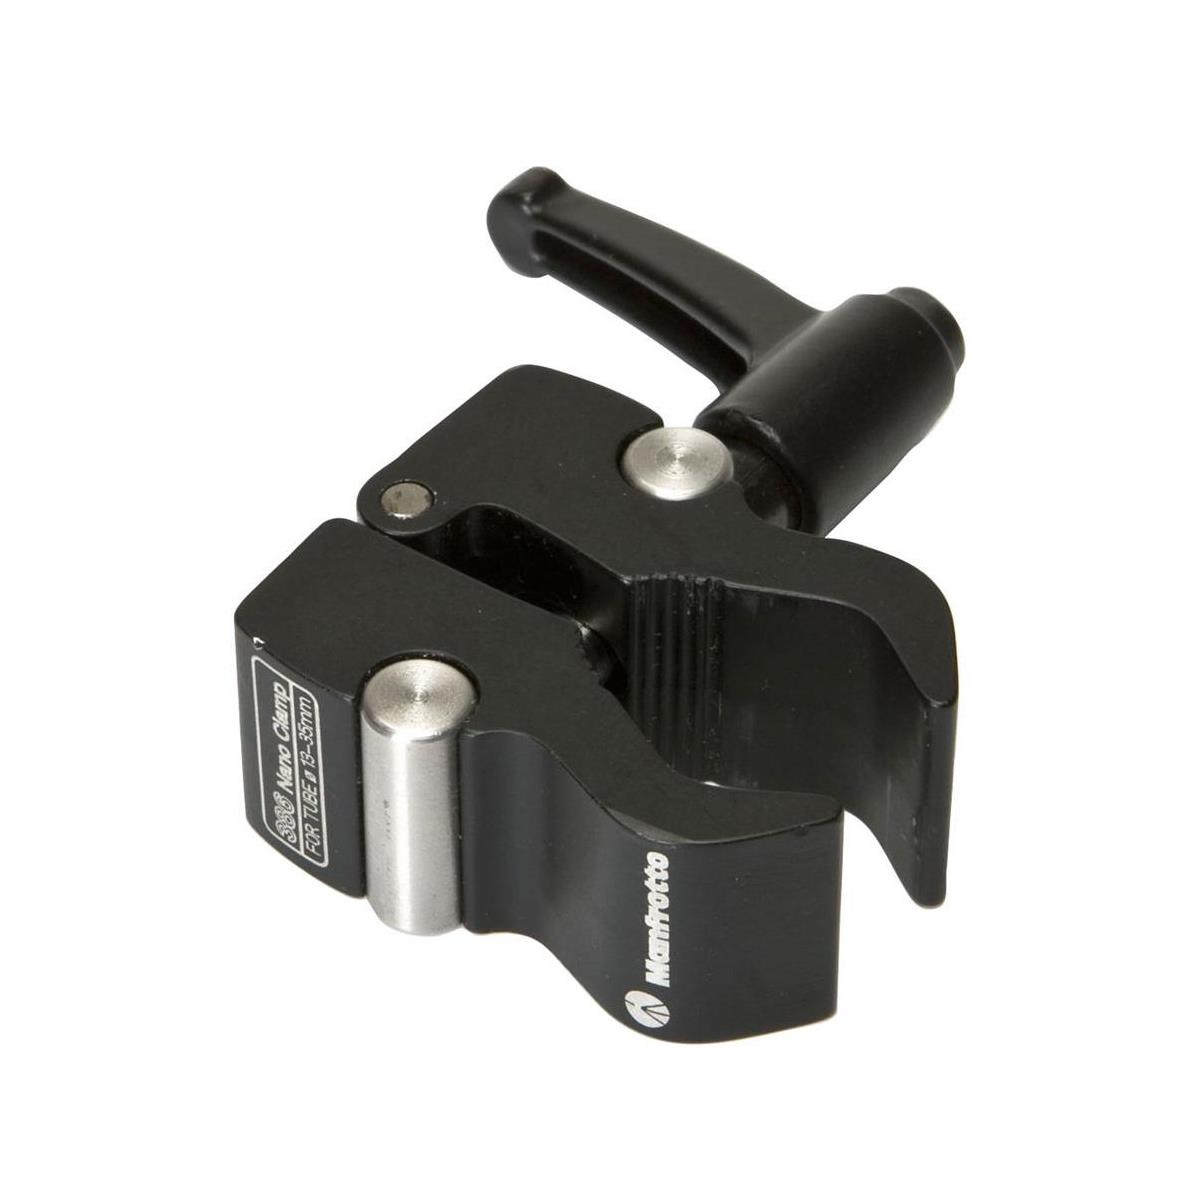 

Manfrotto 386B Nano Clamp, 13-35mm, with 3/8" & 1/4" Receiver